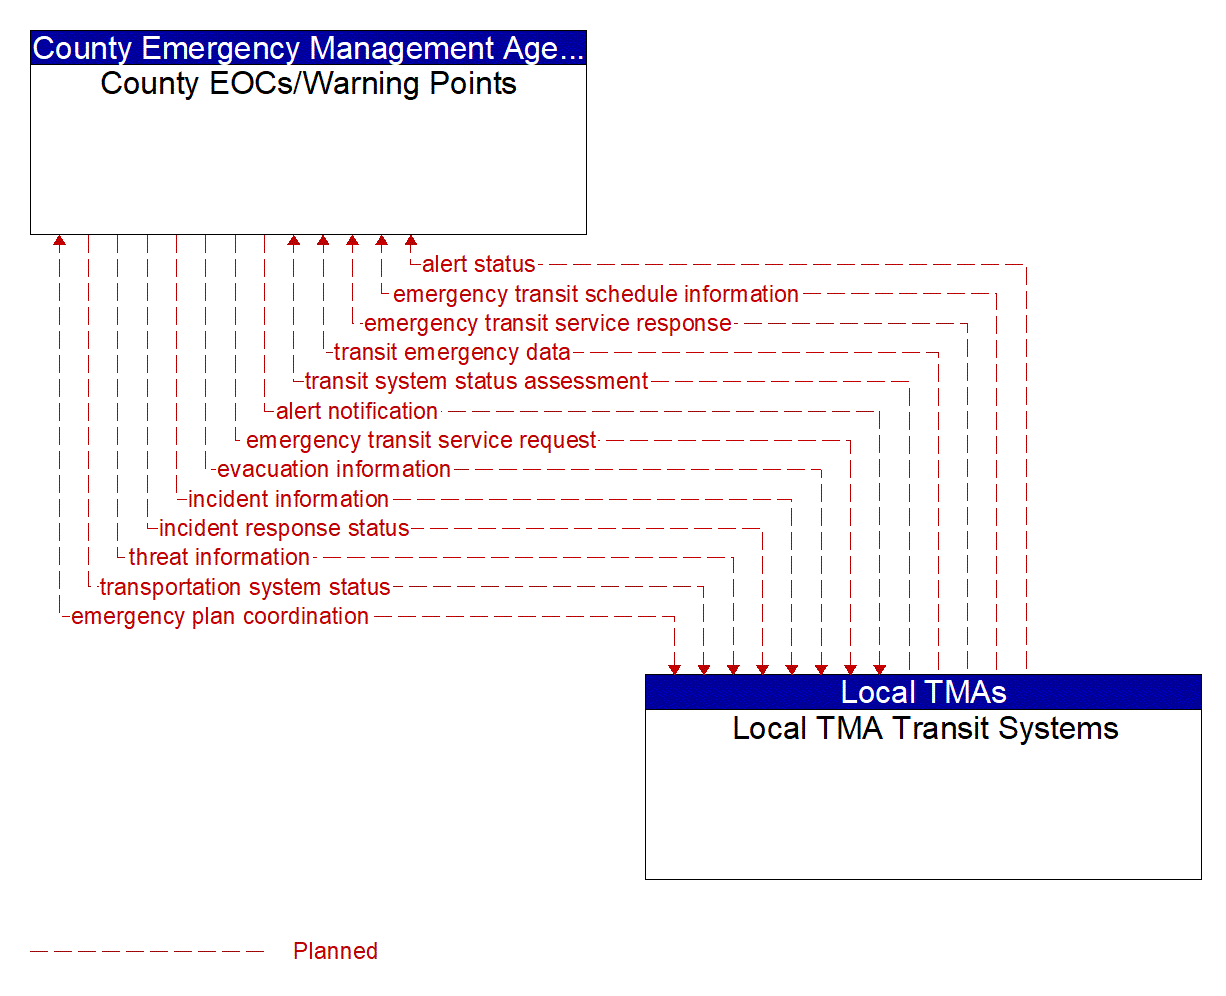 Architecture Flow Diagram: Local TMA Transit Systems <--> County EOCs/Warning Points